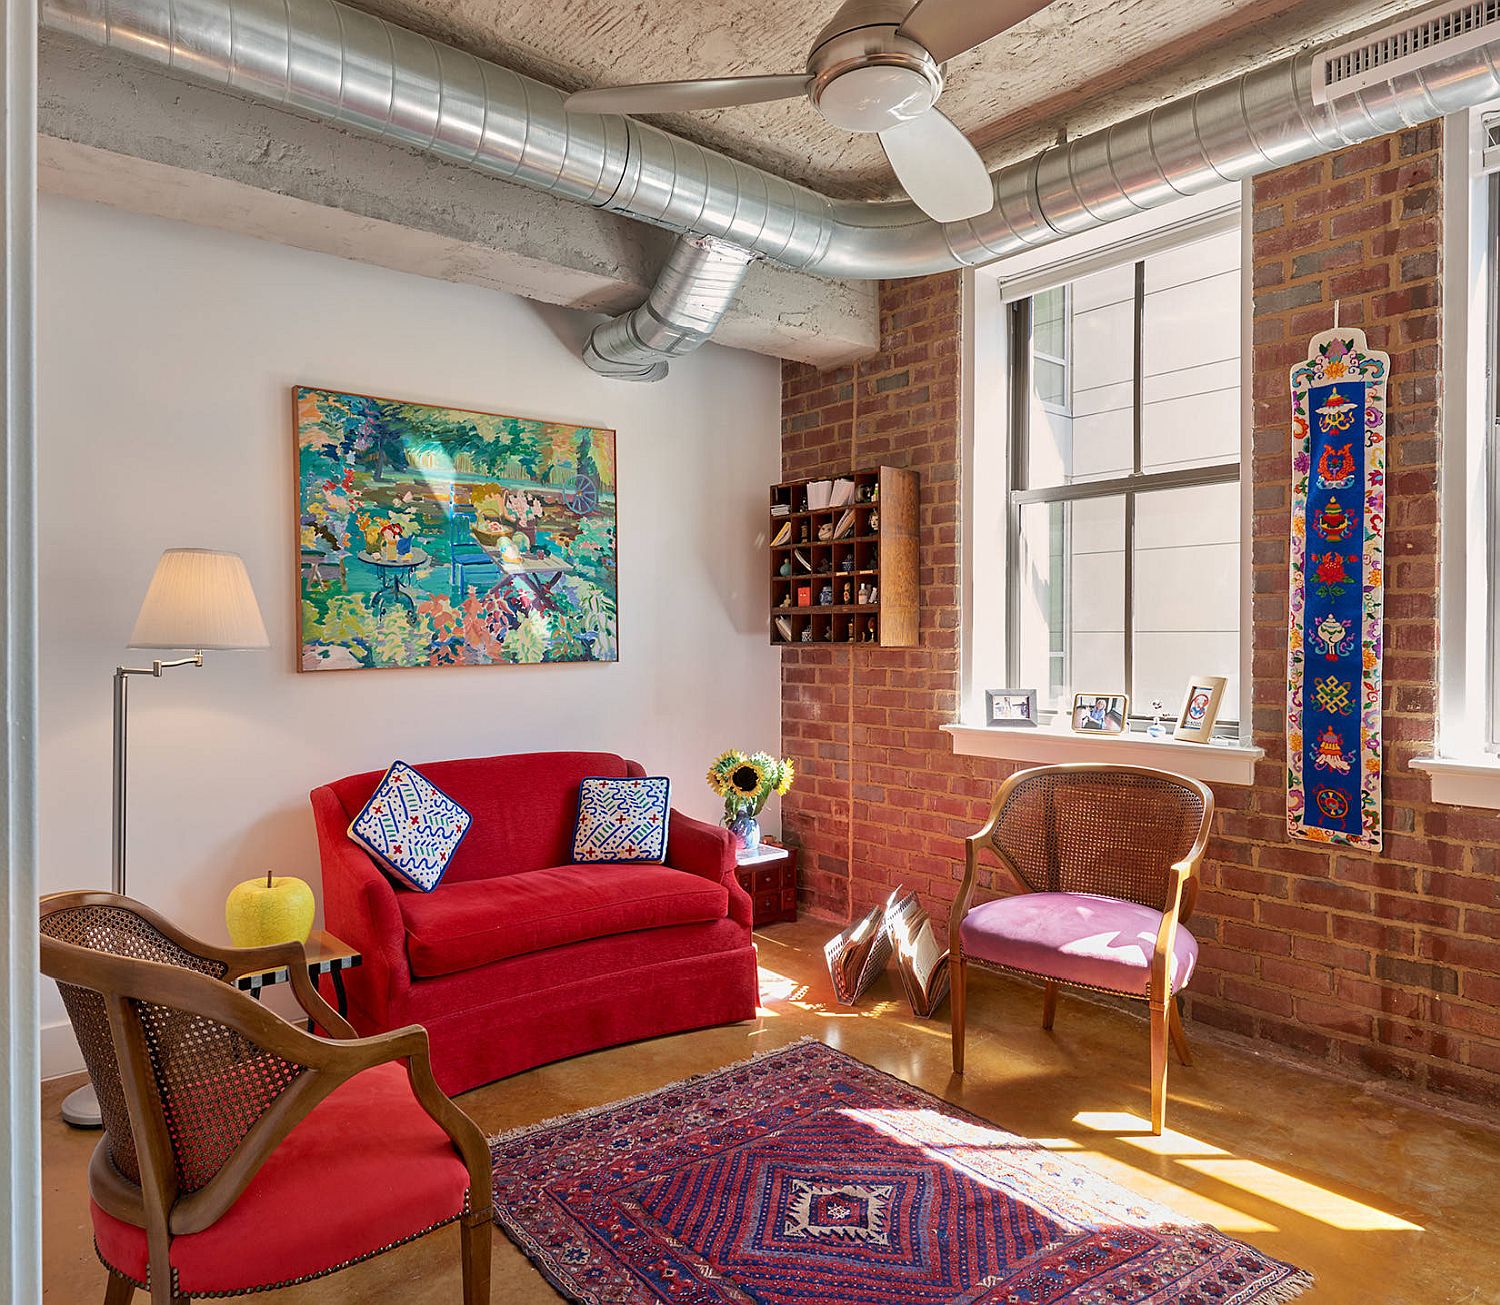 Combining-industrial-and-eclectic-styles-in-the-small-living-room-with-brick-wall-and-concrete-ceiling